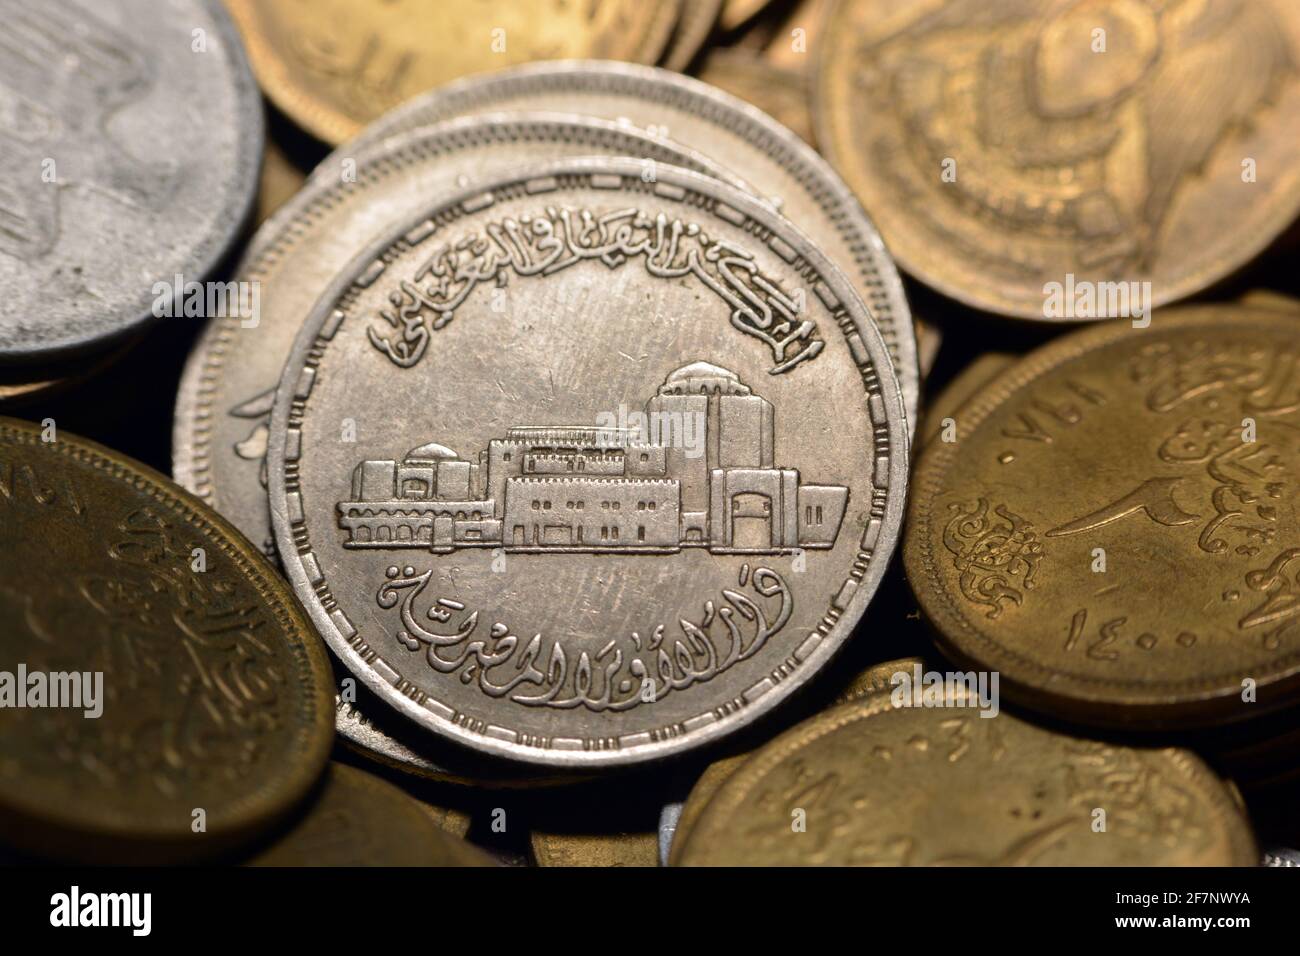 collection of old Egyptian coins background Stock Photo